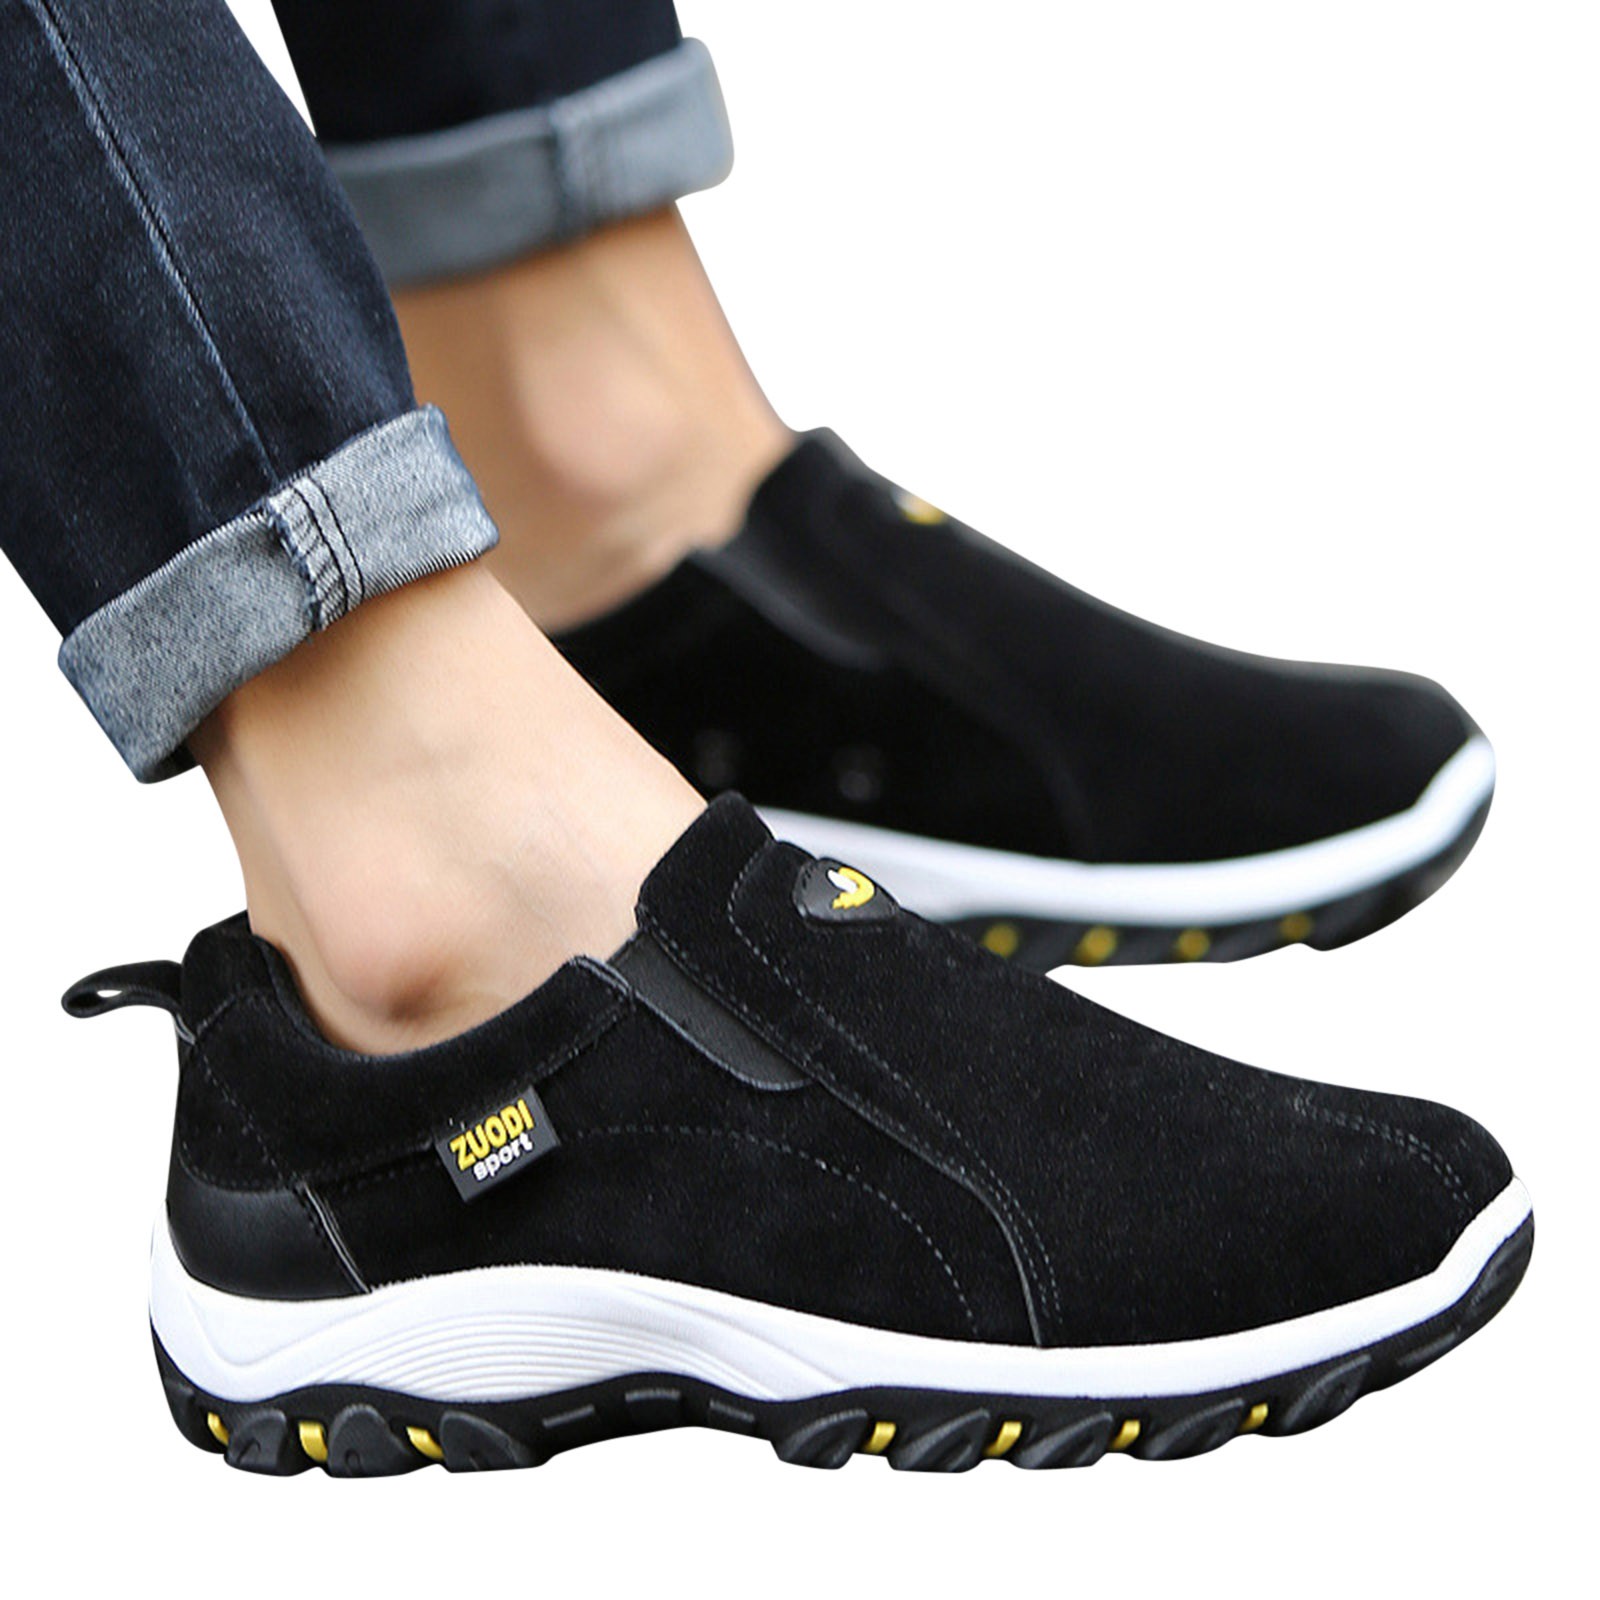 Gubotare Mens Shoes Casual Running Shoes Casual Tennis Walking Gym Fashion Lightweight Slip On Sneakers,Black 11 - image 3 of 5